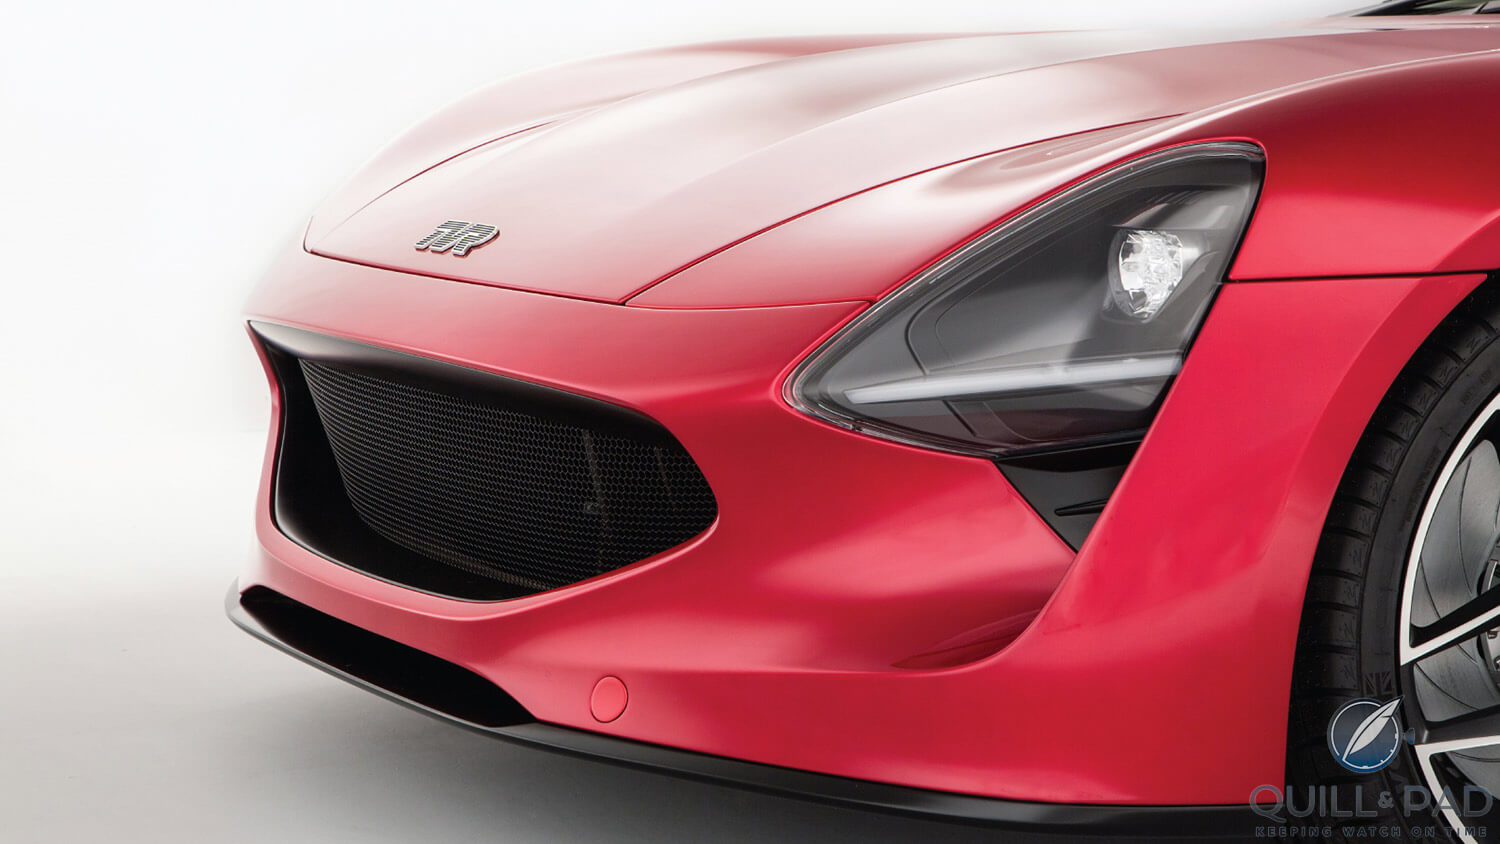 Front of the 2018 TVR Griffith